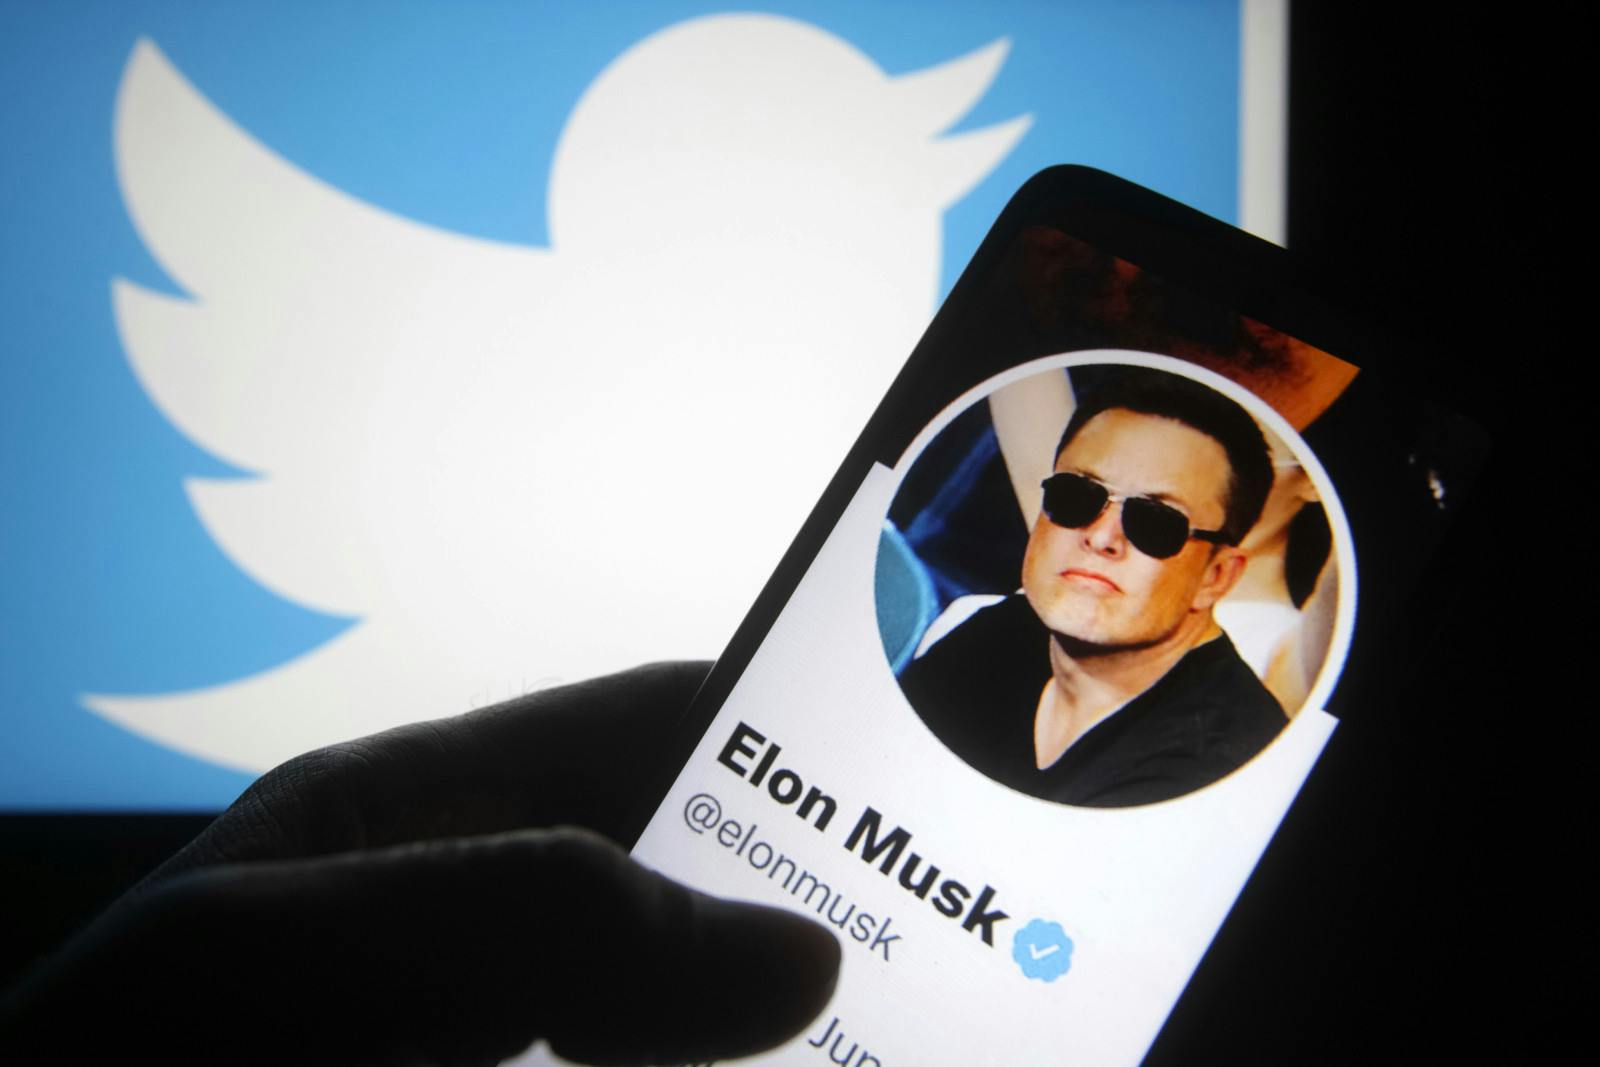 Elon Musk on a background of Twitter